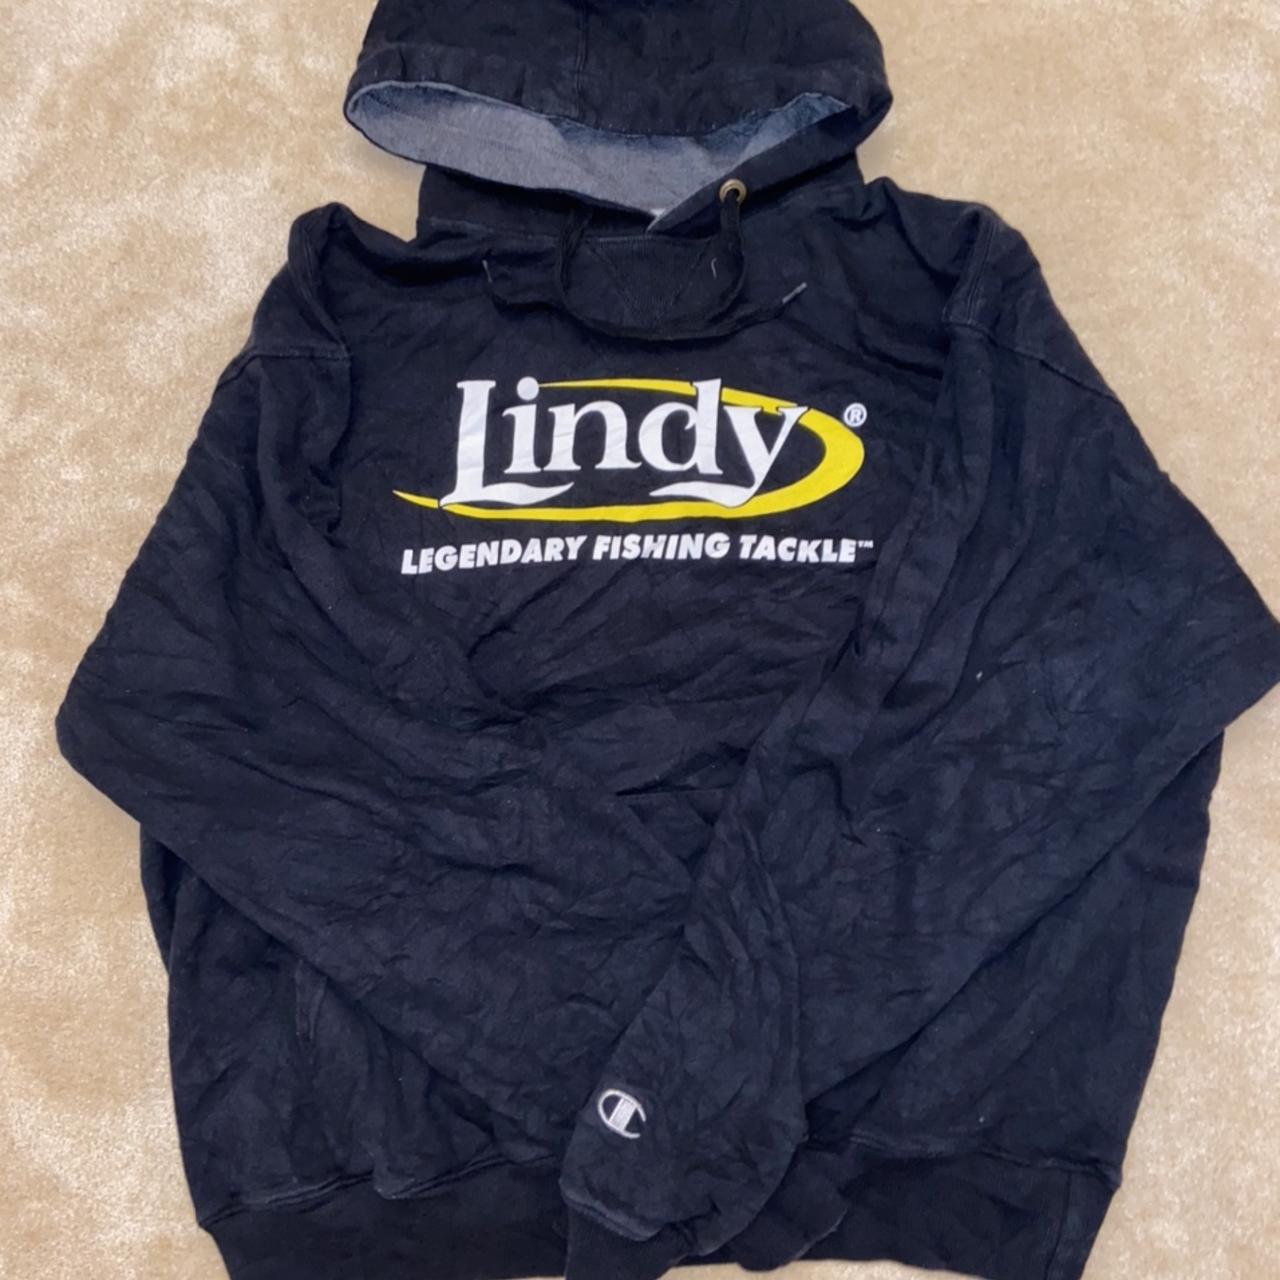 Champion lindy legendary fishing tackle THICK - Depop